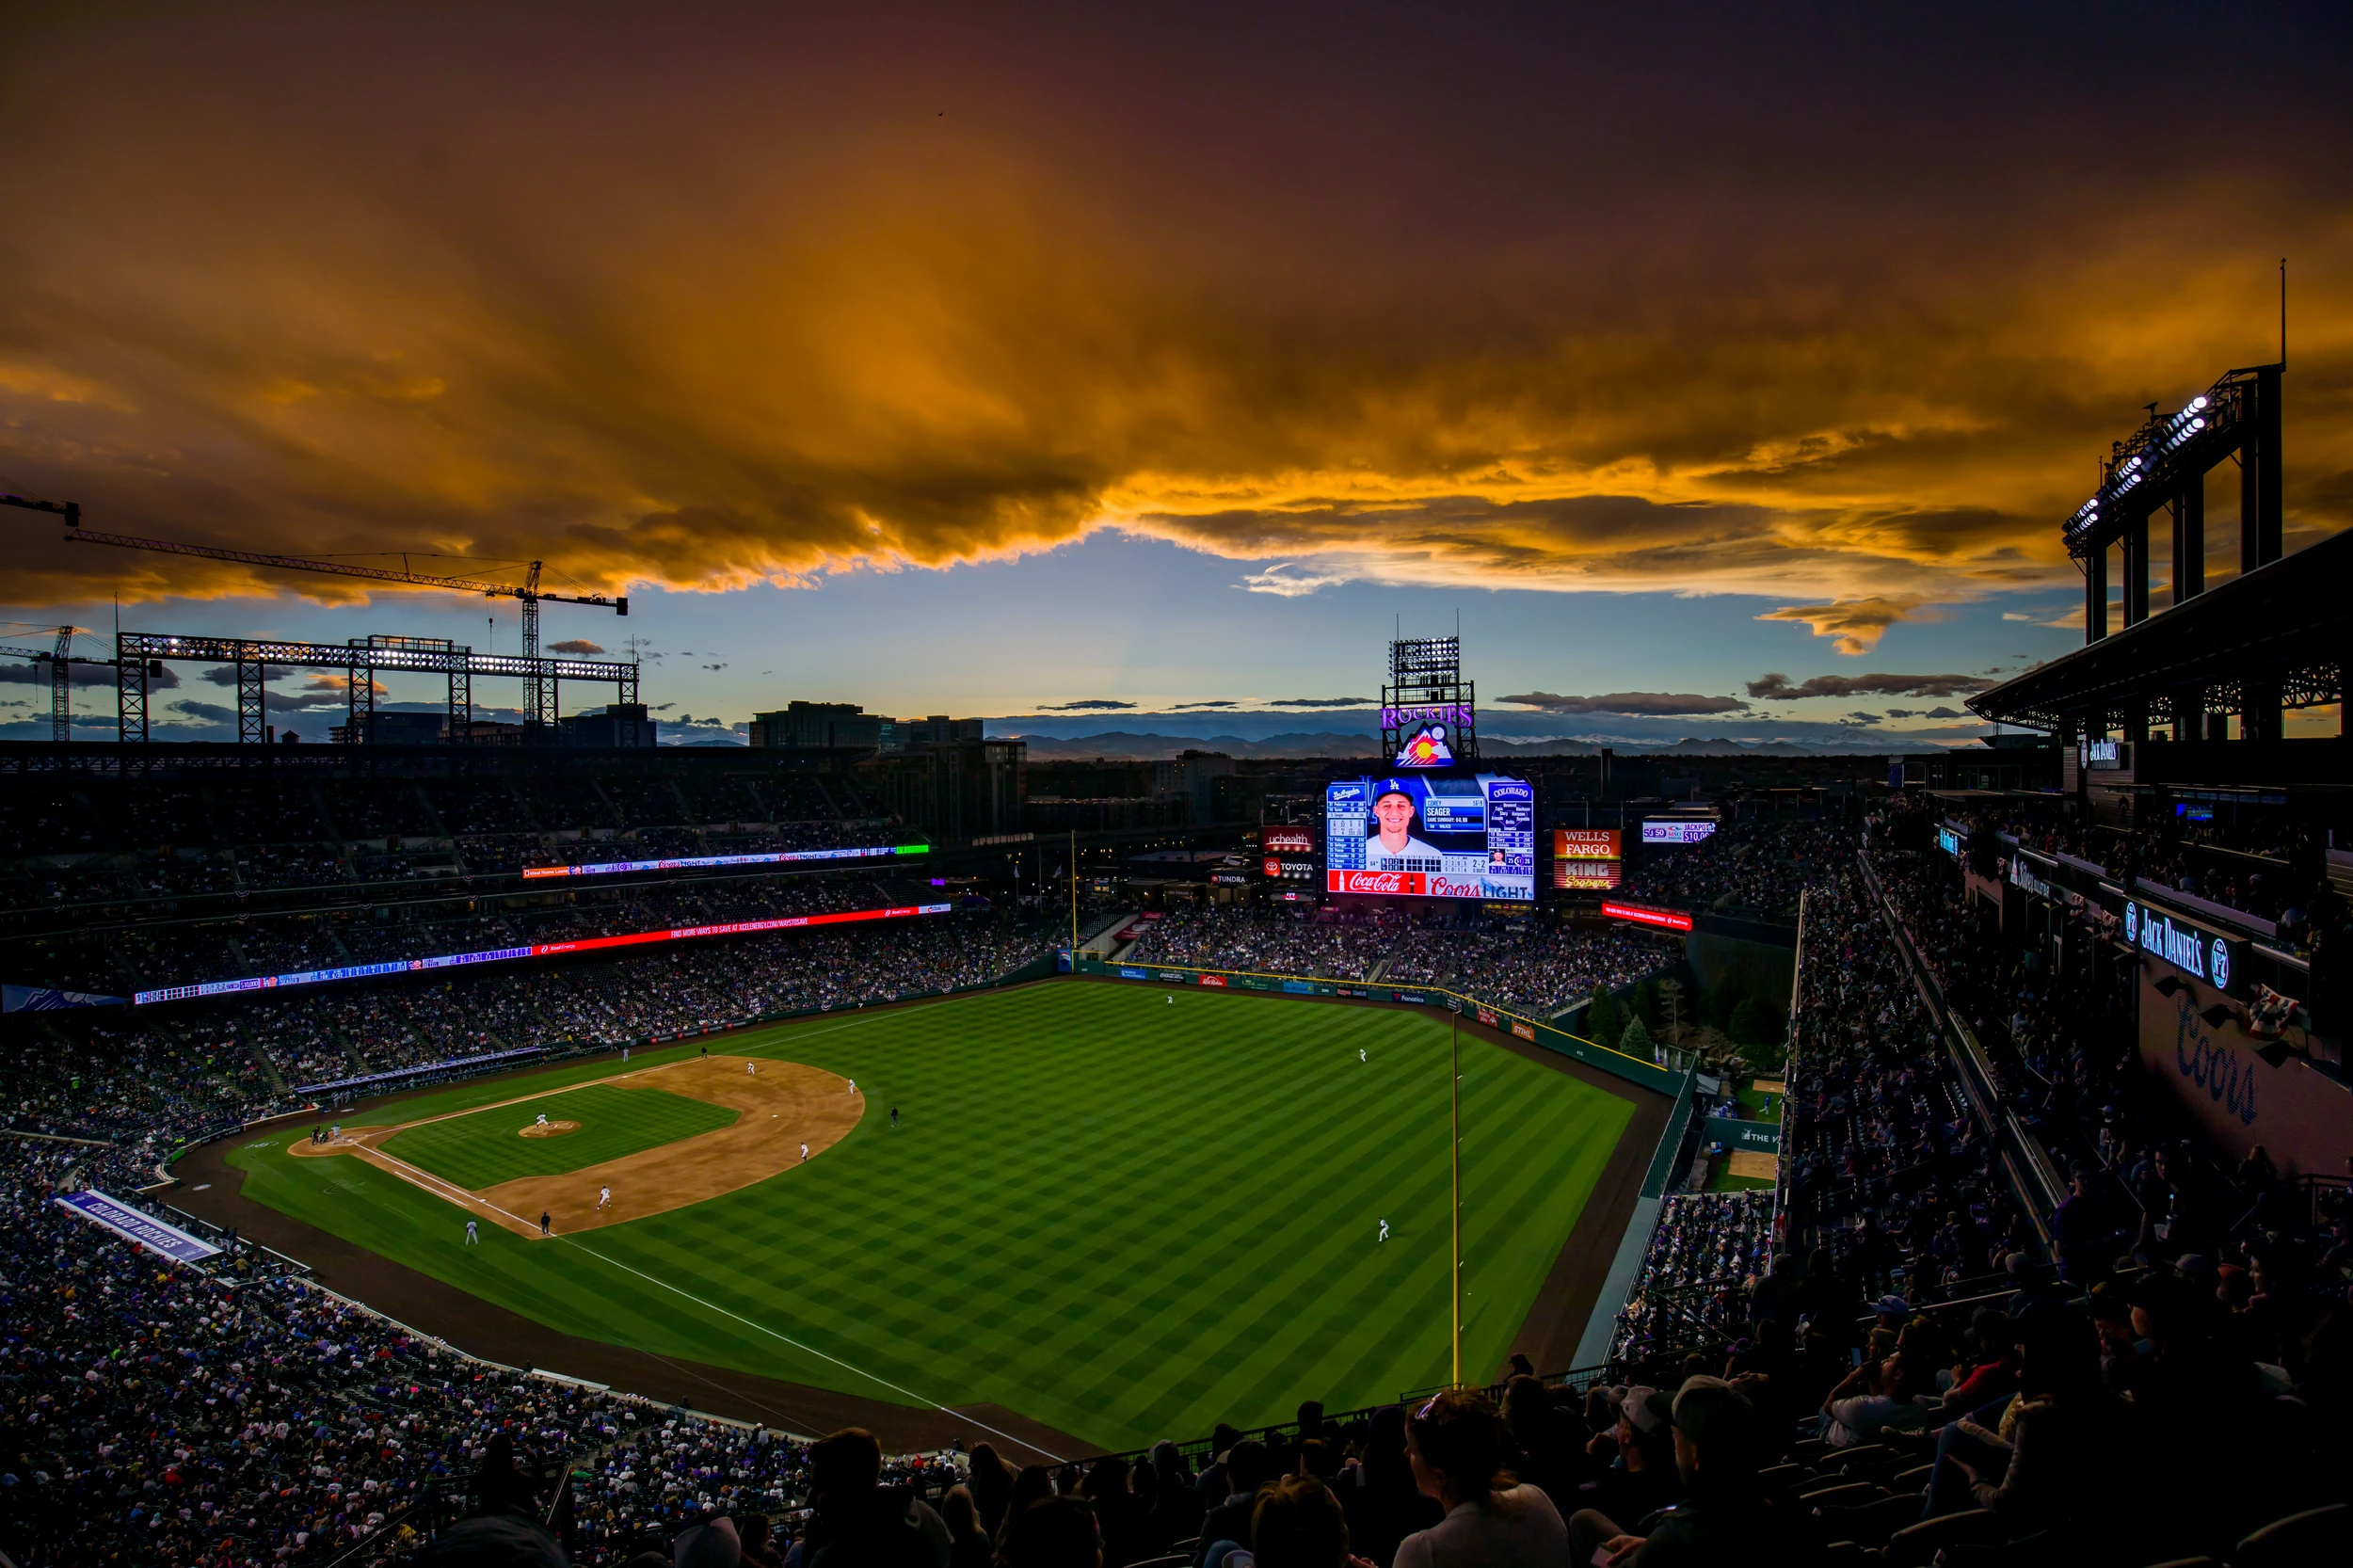 Coors Field in Denver Is Chosen for M.L.B. All-Star Game - The New